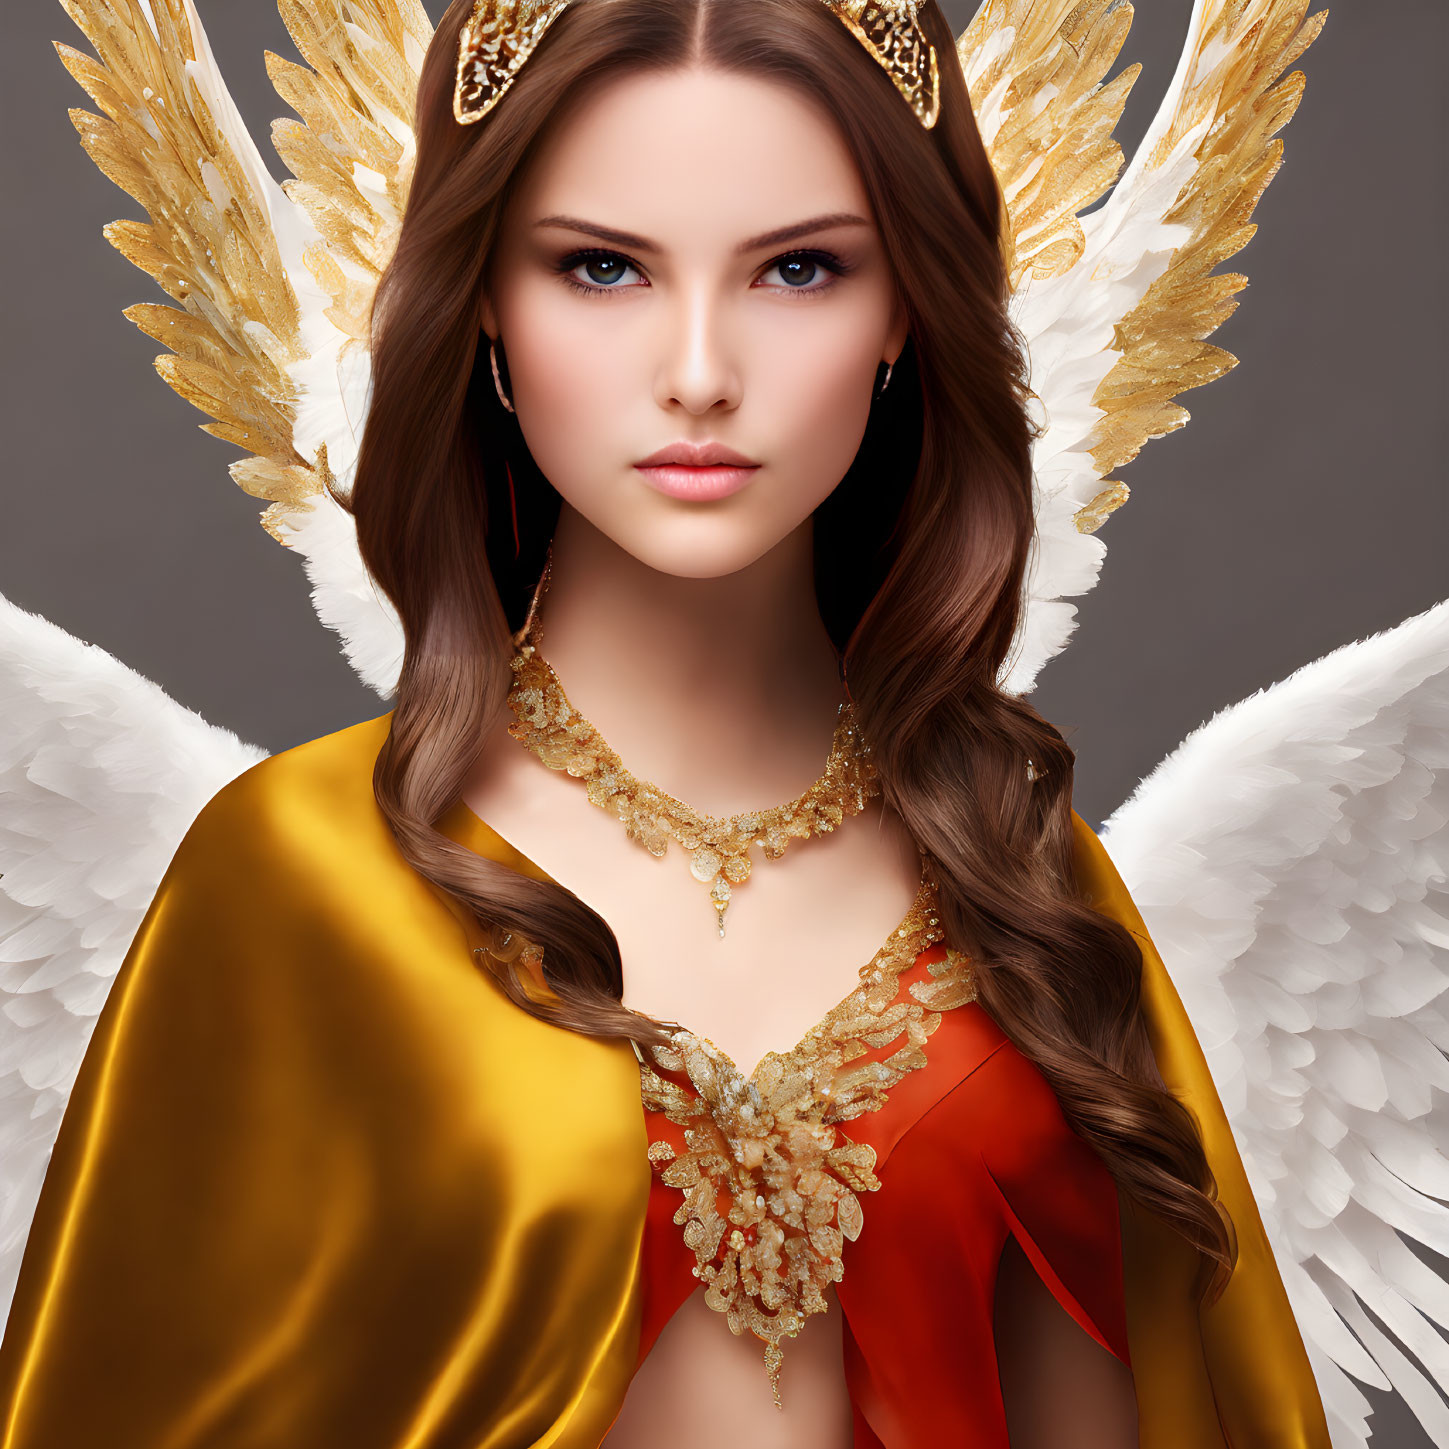 Digital artwork: Woman with angelic wings and ornate gold accessories on grey backdrop